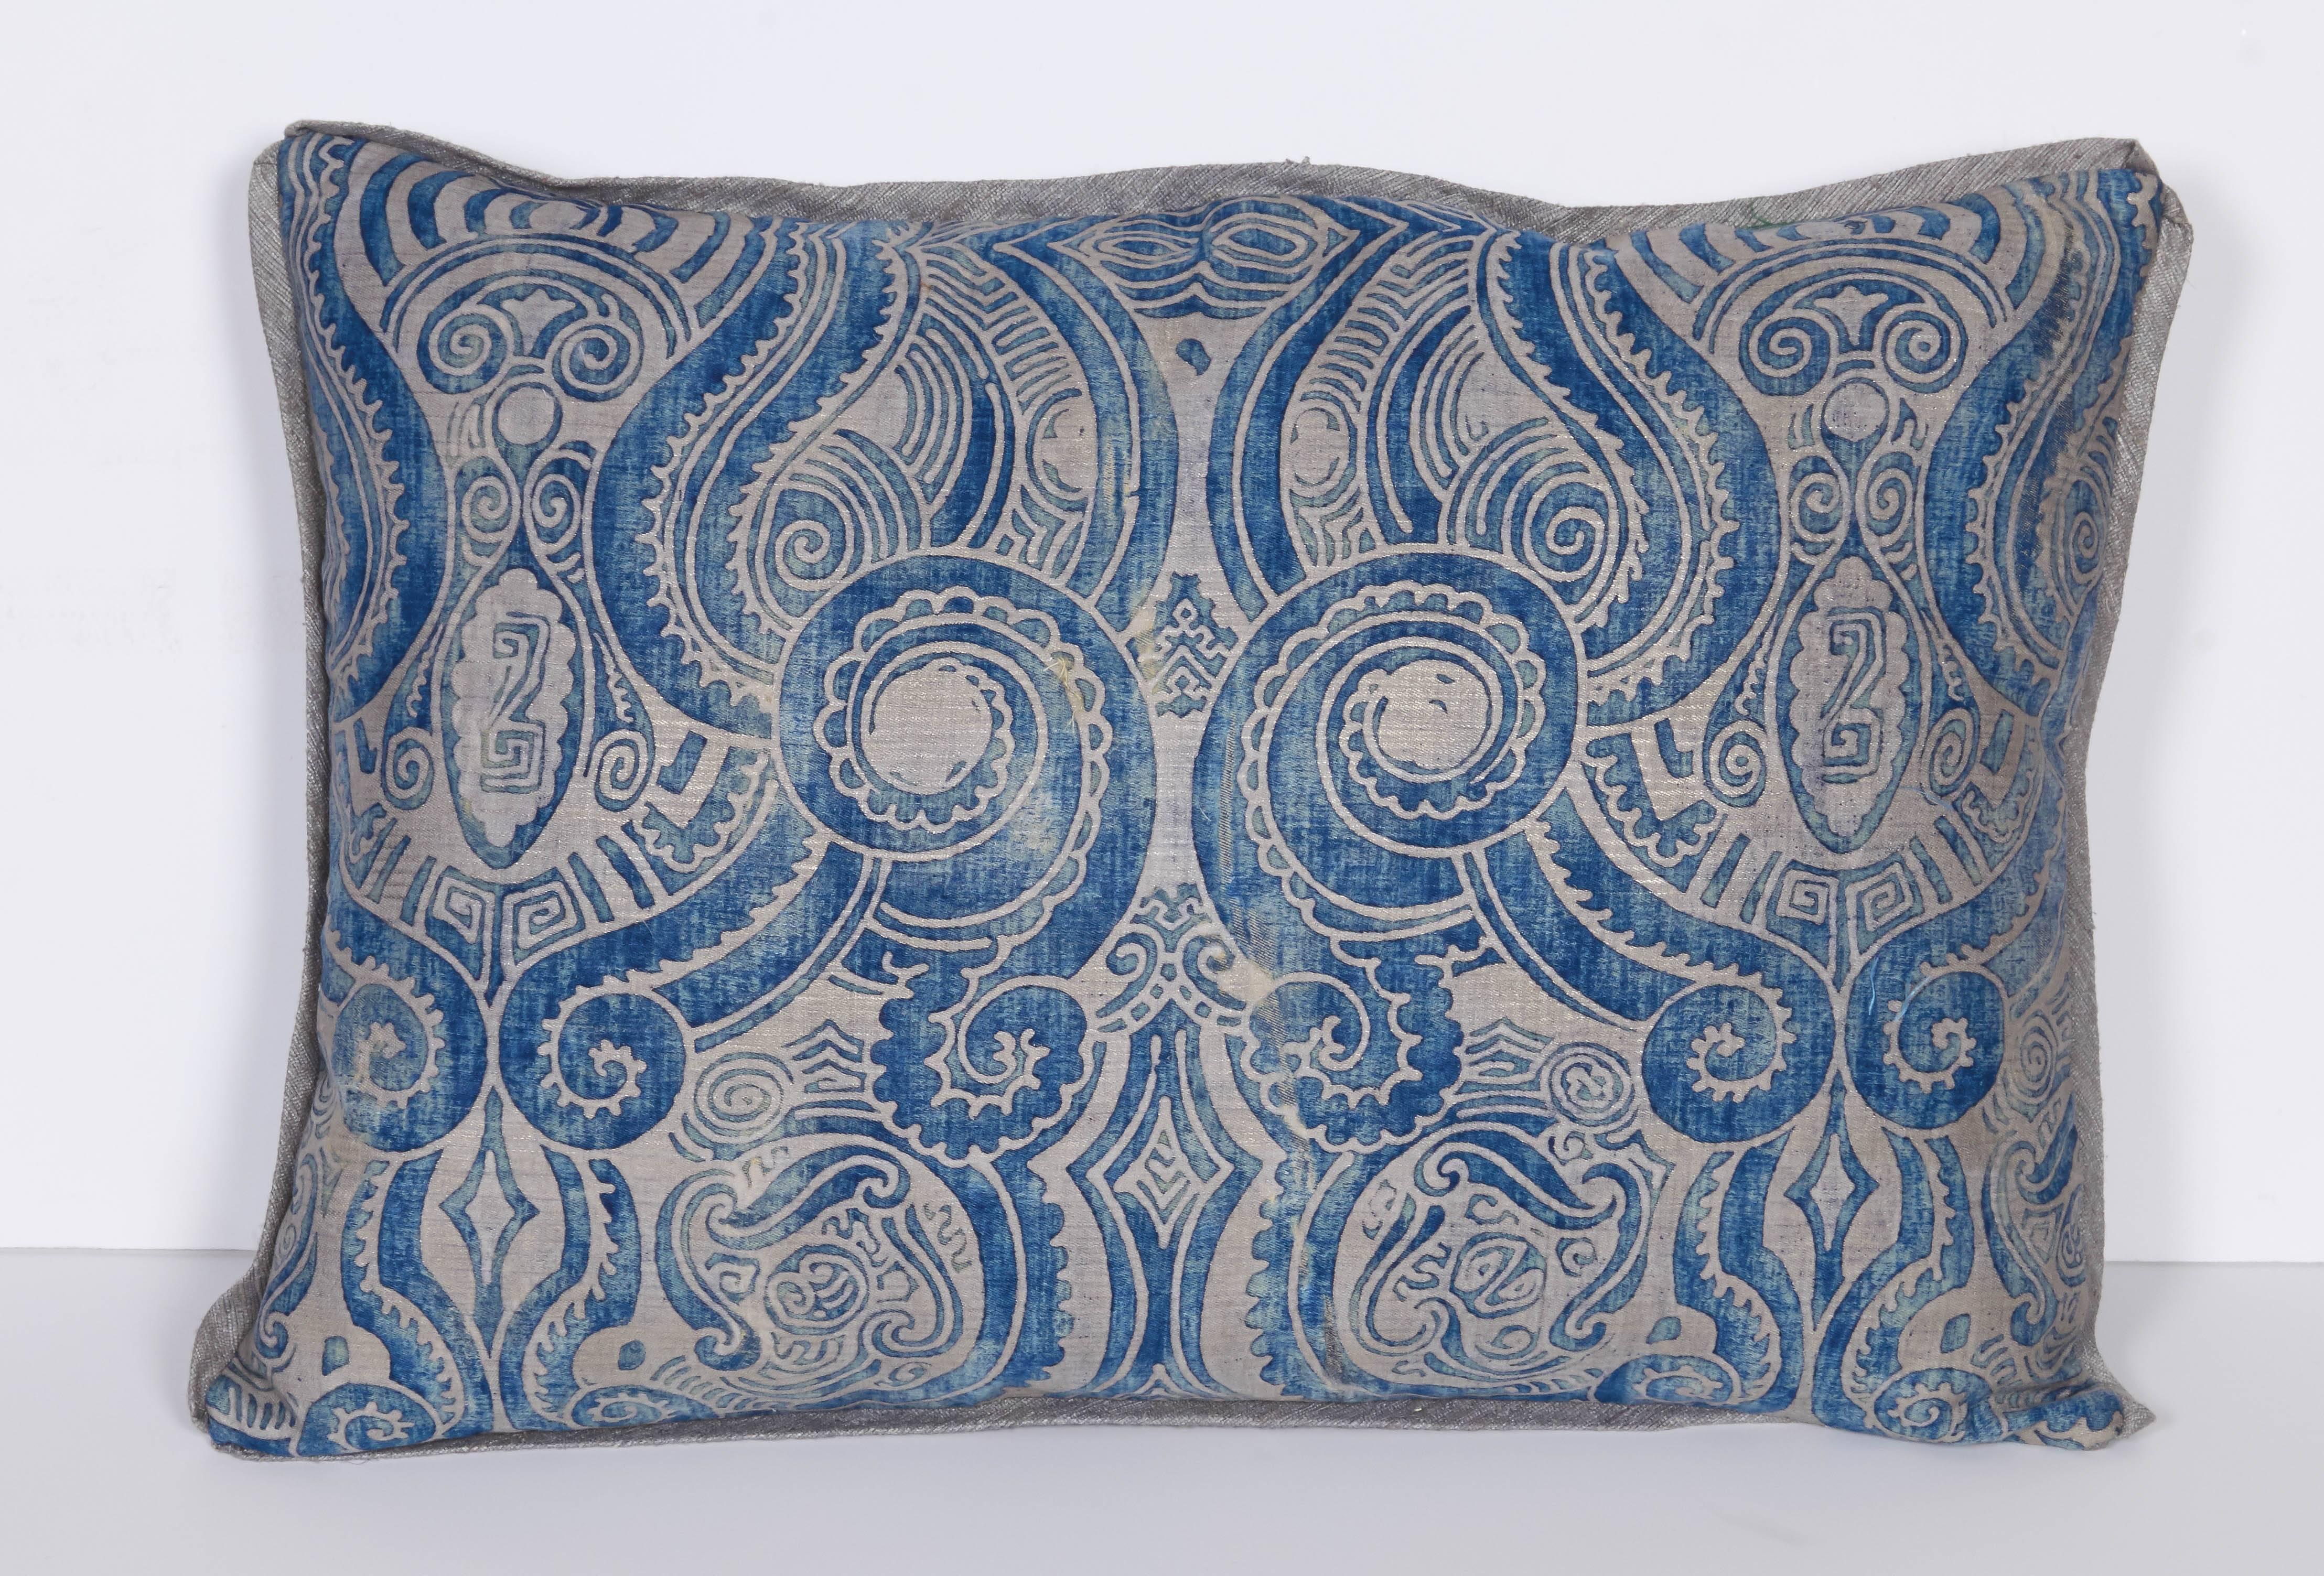 A pair of Fortuny fabric lumbar cushions in the Peruviano pattern, silk bias edging and peacock blue taffeta backing, the pattern, a Mayan inspired design with scroll motif. Newly made using vintage Fortuny fabric, circa 1920.
50 down/50 feather